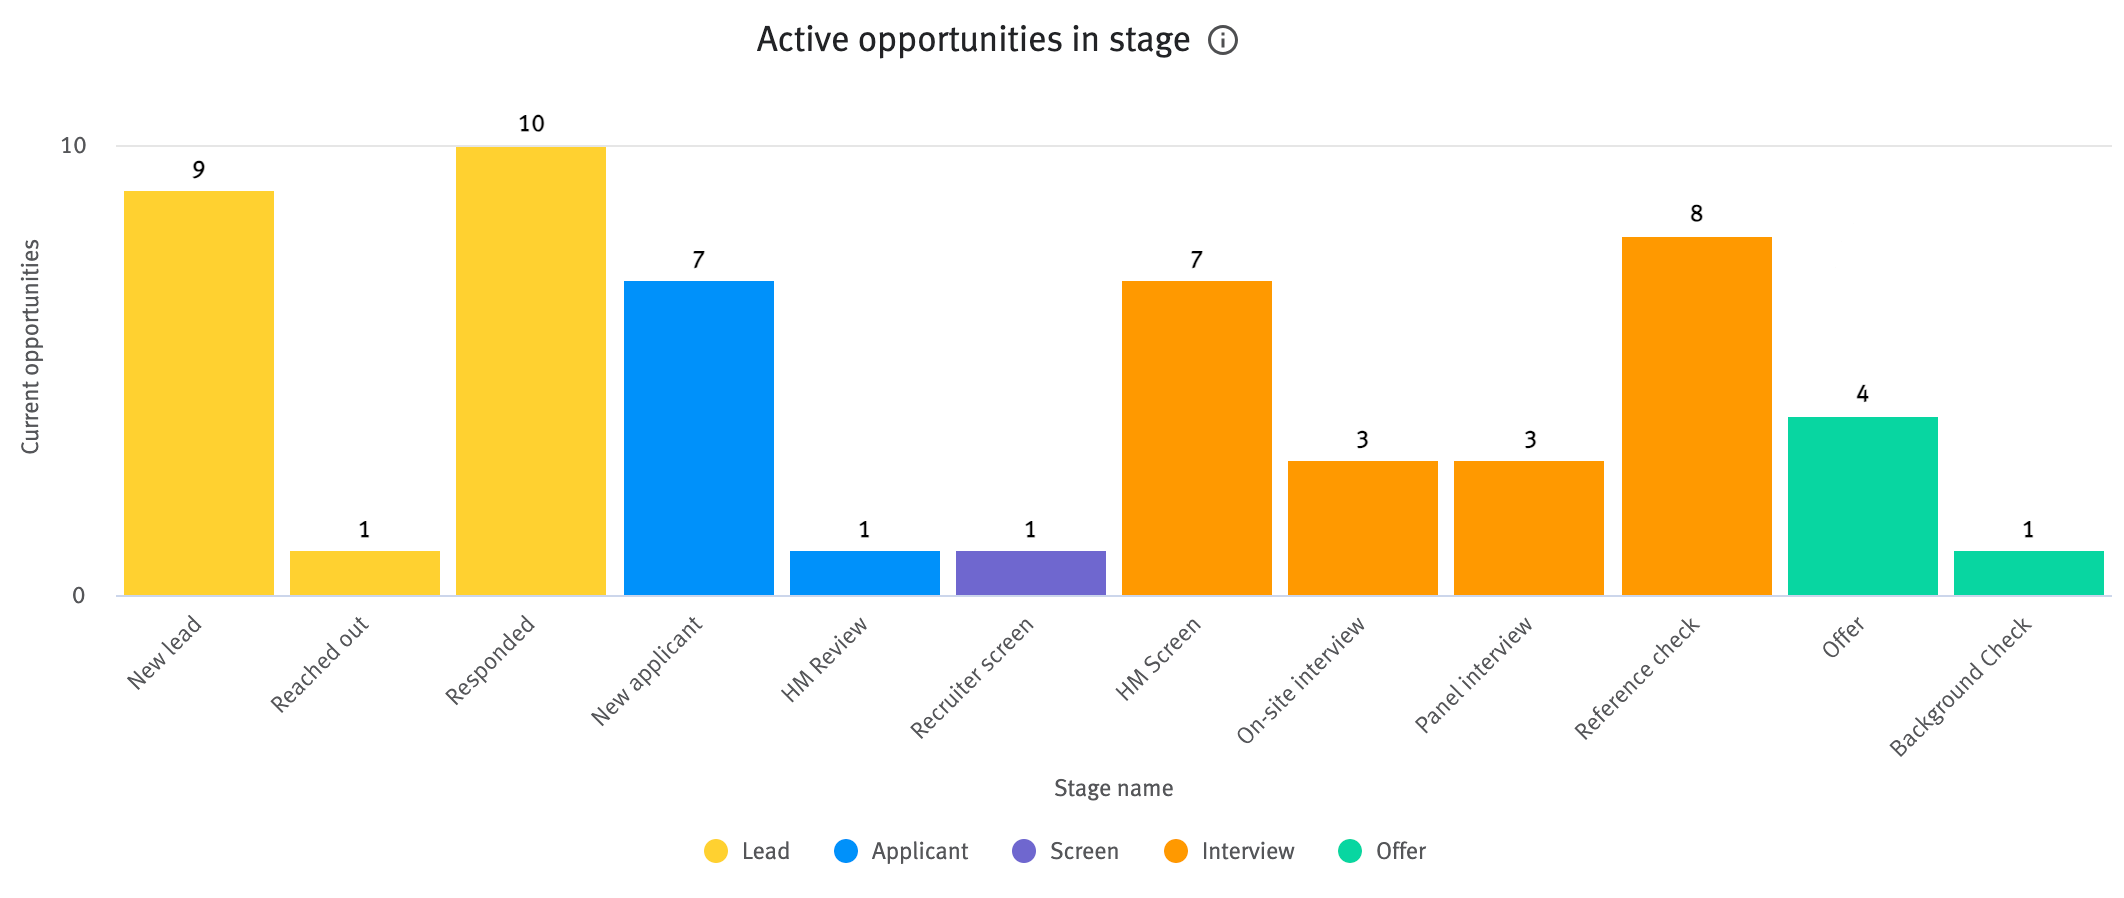 Active opportunities in stage